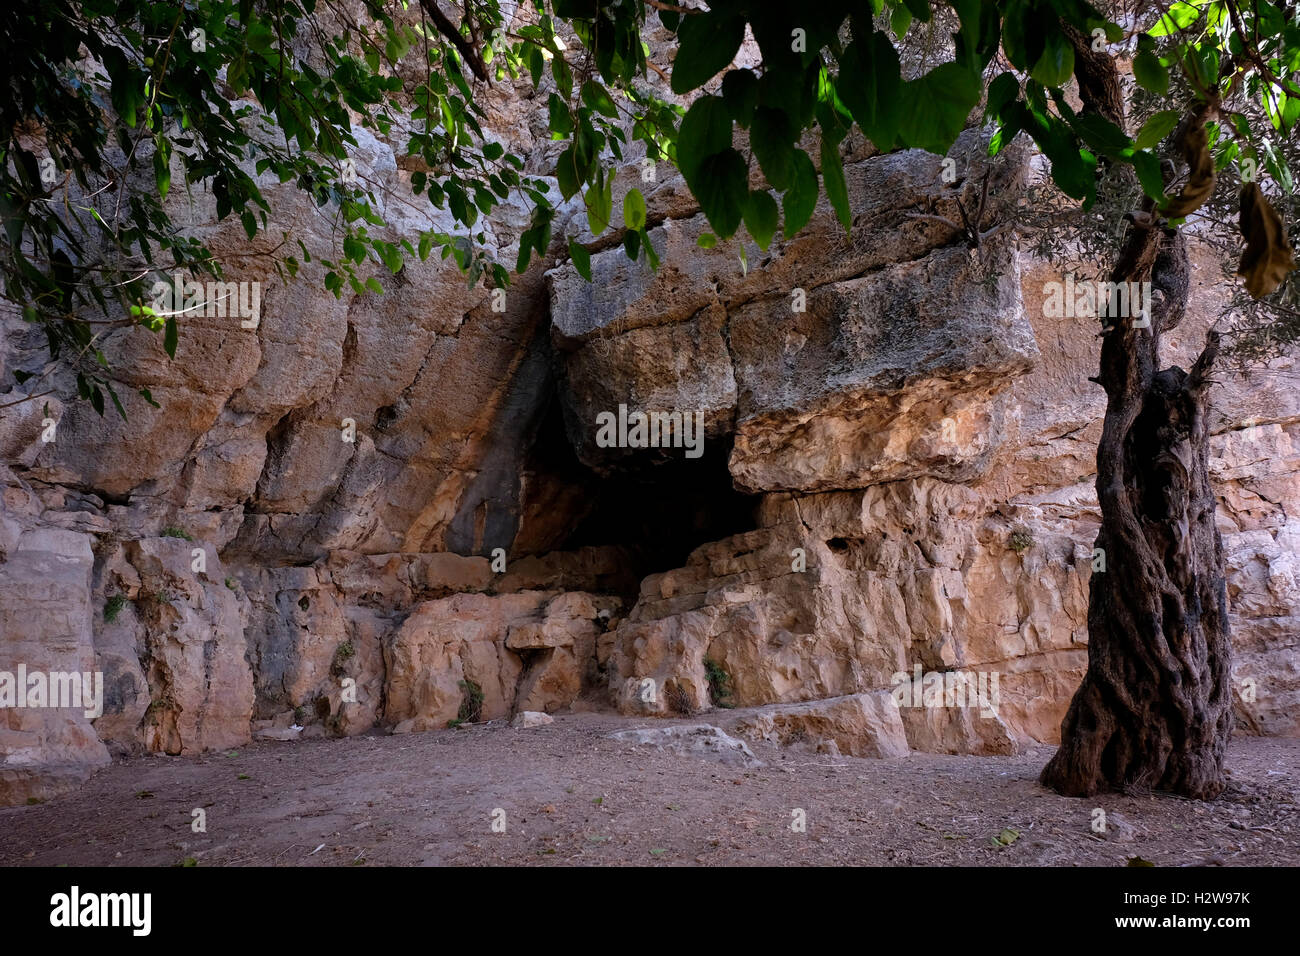 View of ancient burial chamber that was reused by generations of families from as early as the seventh until the fifth century BC in Valley of Hinnom the modern name for the biblical Gehenna or Gehinnom valley surrounding Jerusalem's Old City, Israel Stock Photo